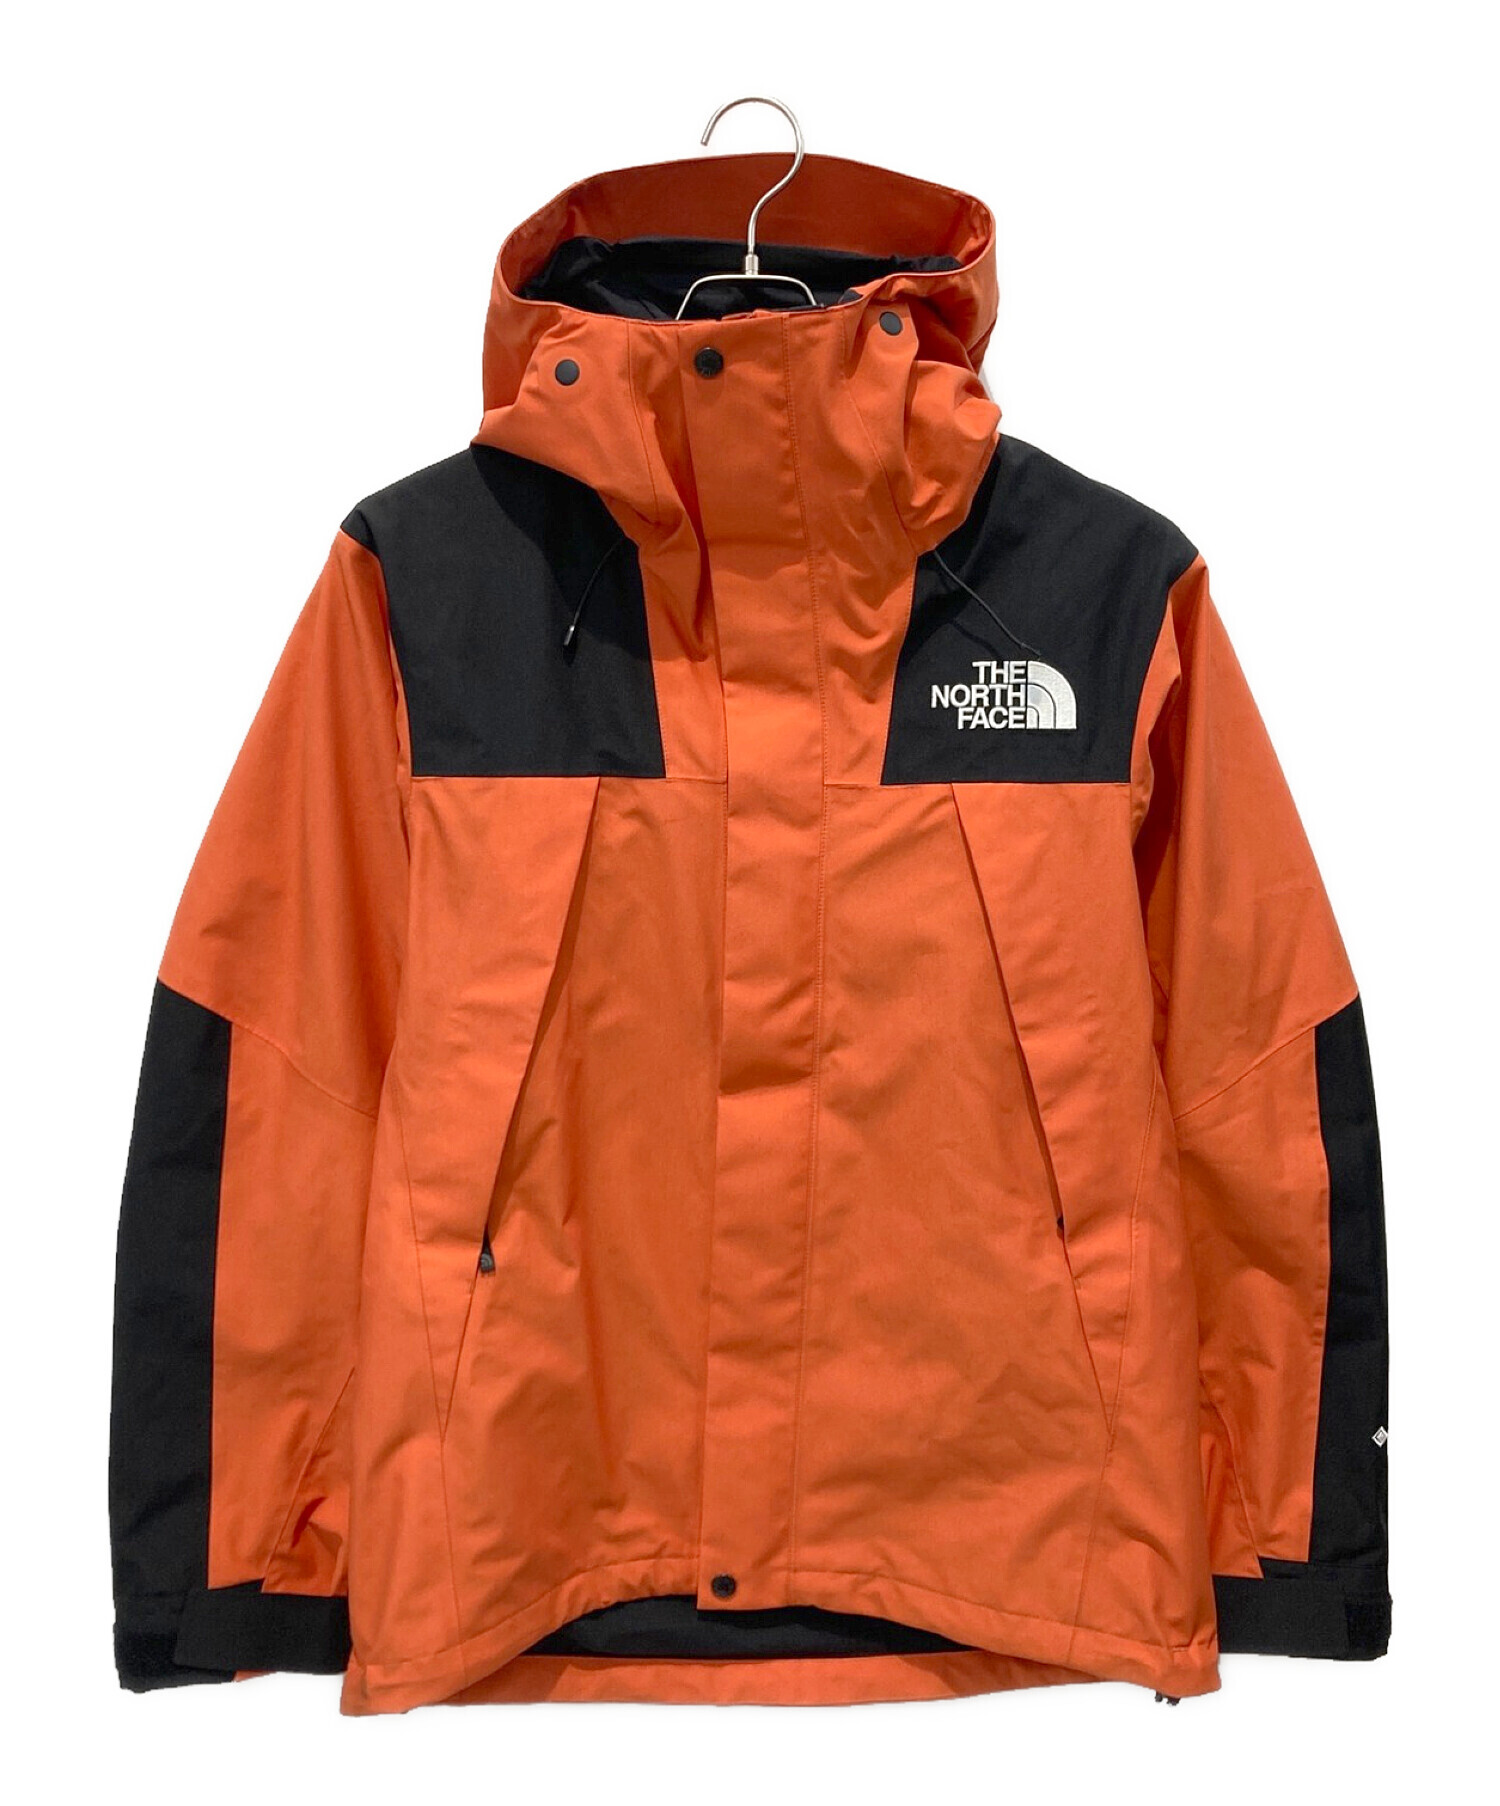 THE NORTH FACE MOUNTAIN JACKET M